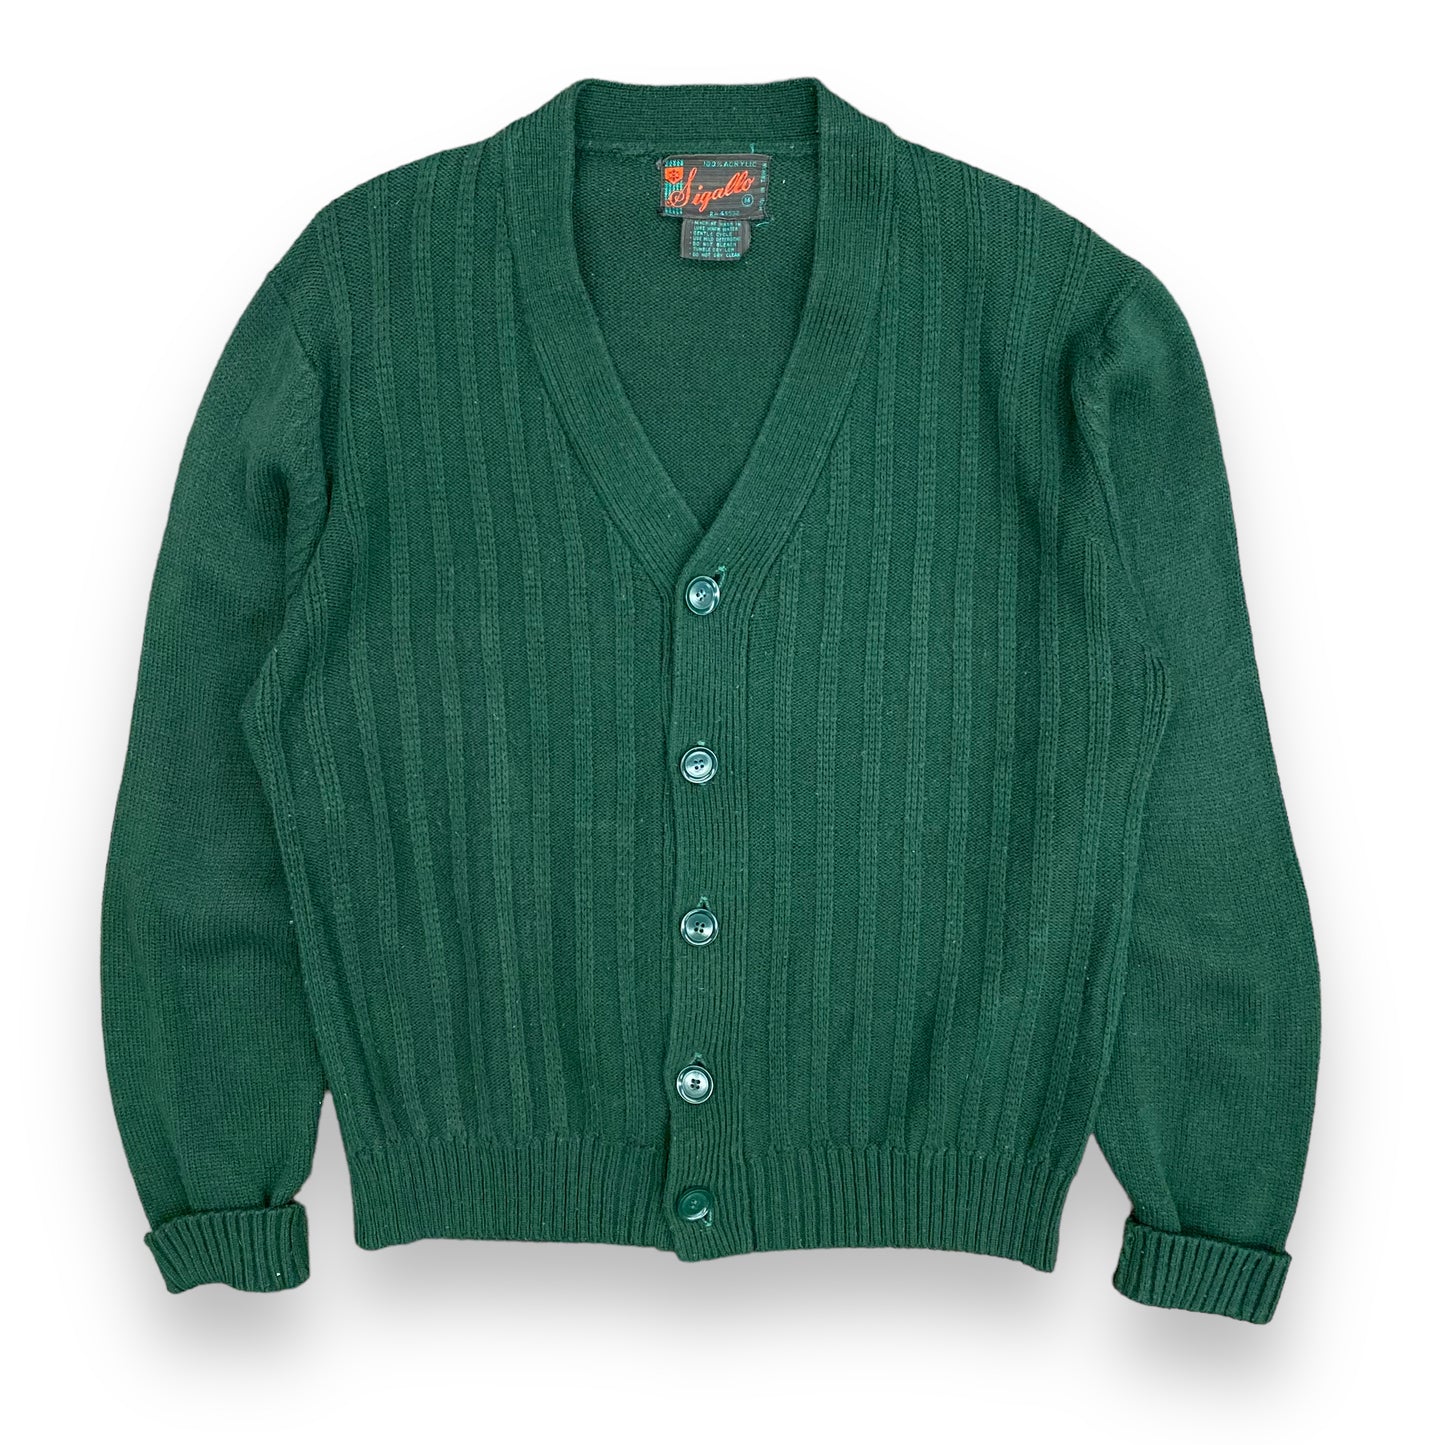 1980s Forest Green Knit Cardigan Sweater - Size Medium